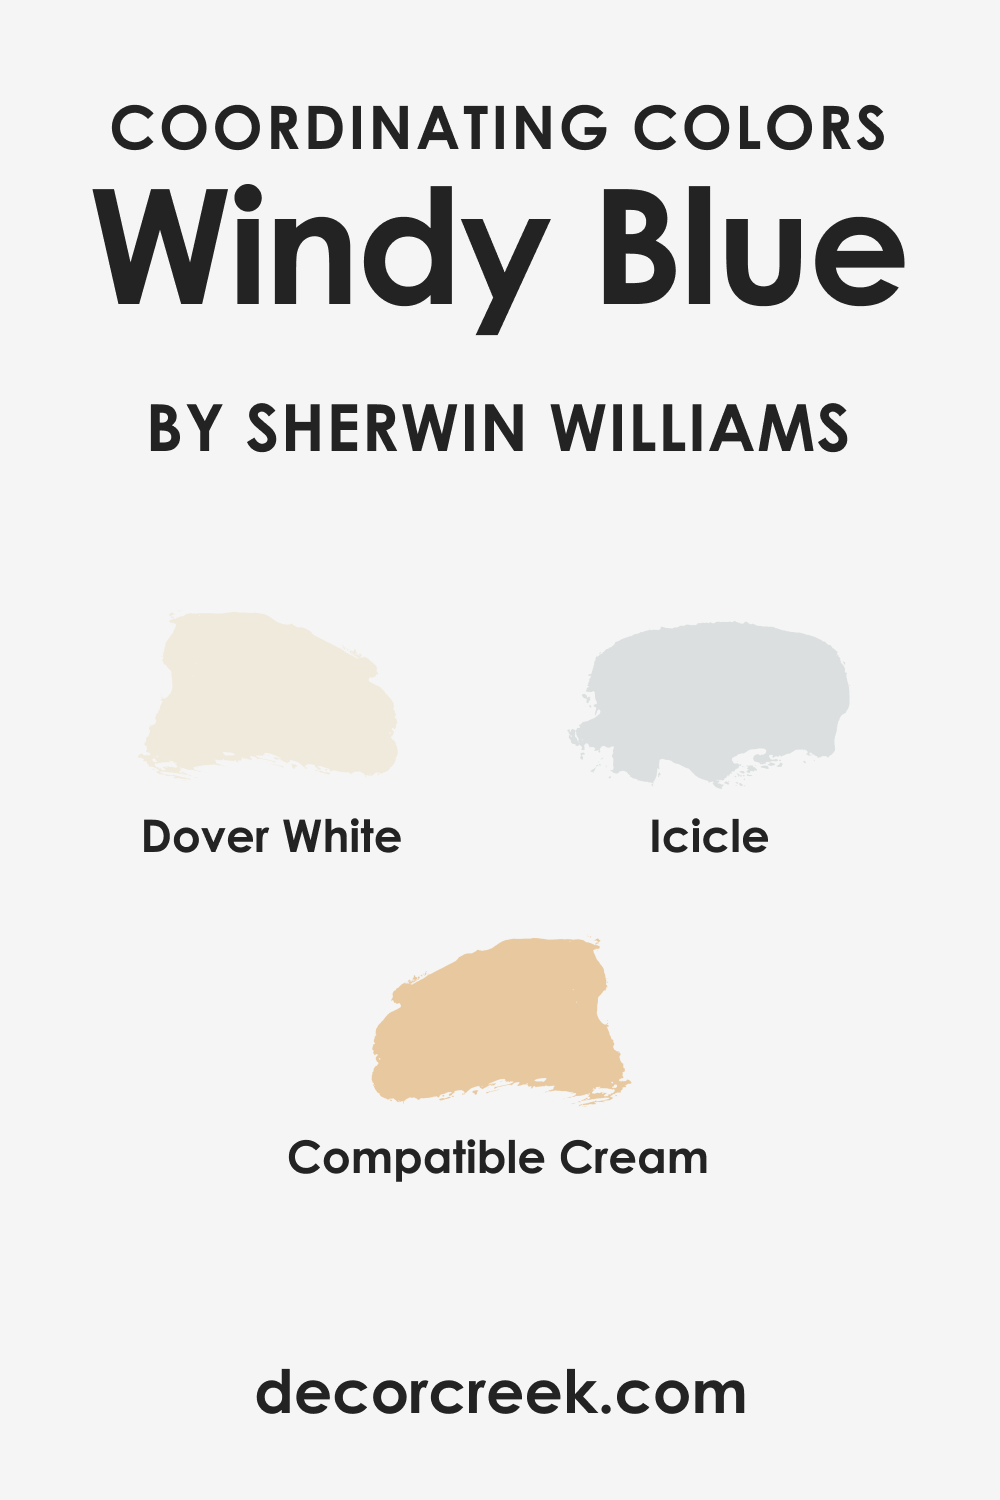 SW Windy Blue Coordinating Colors